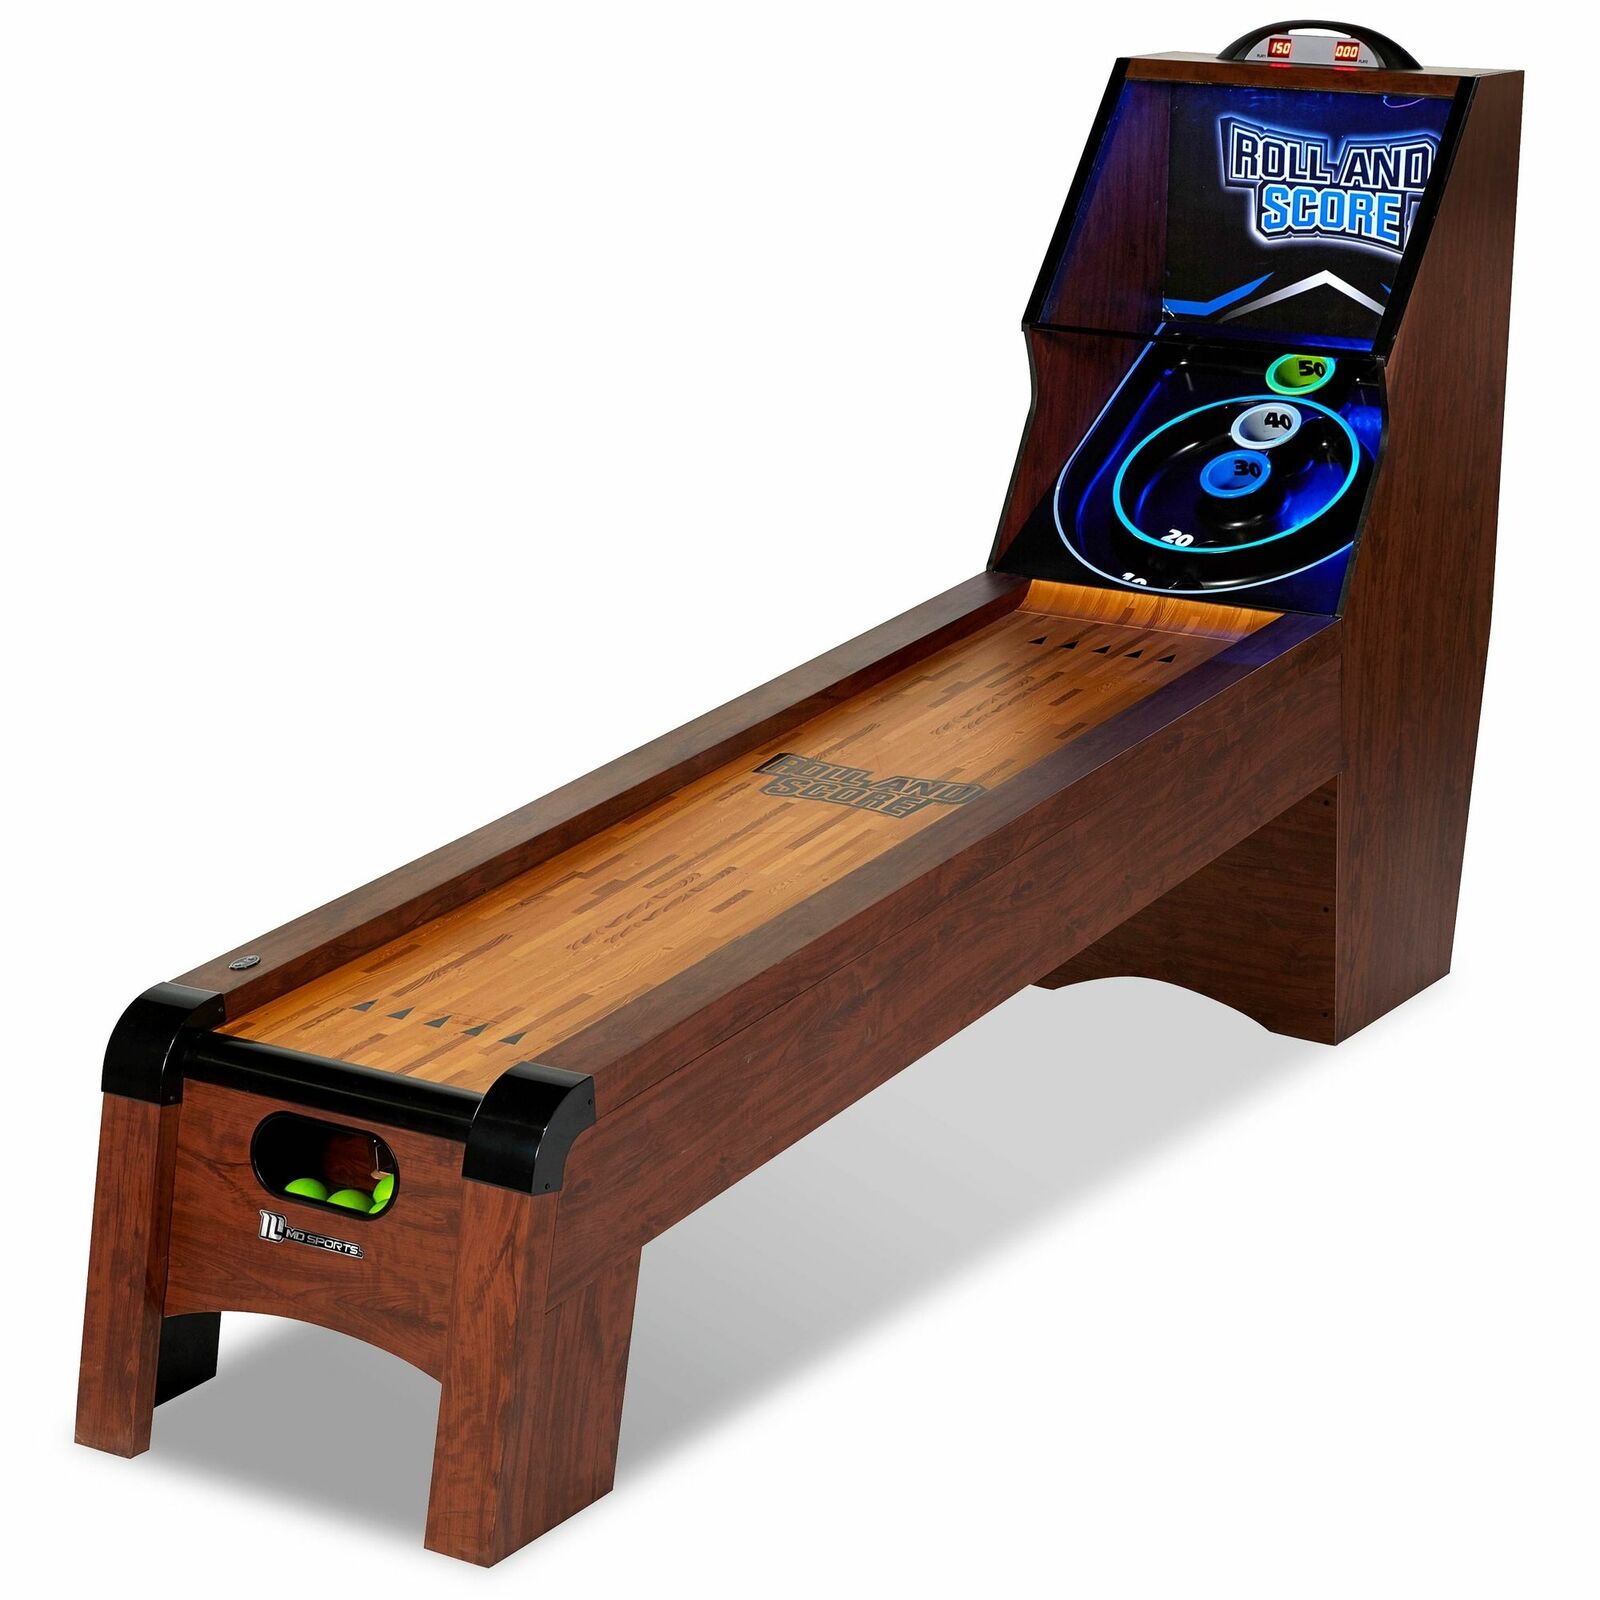 9\' Arcade Roll and Score Game Room Table with LED Scorer, Lights, Sound Effects